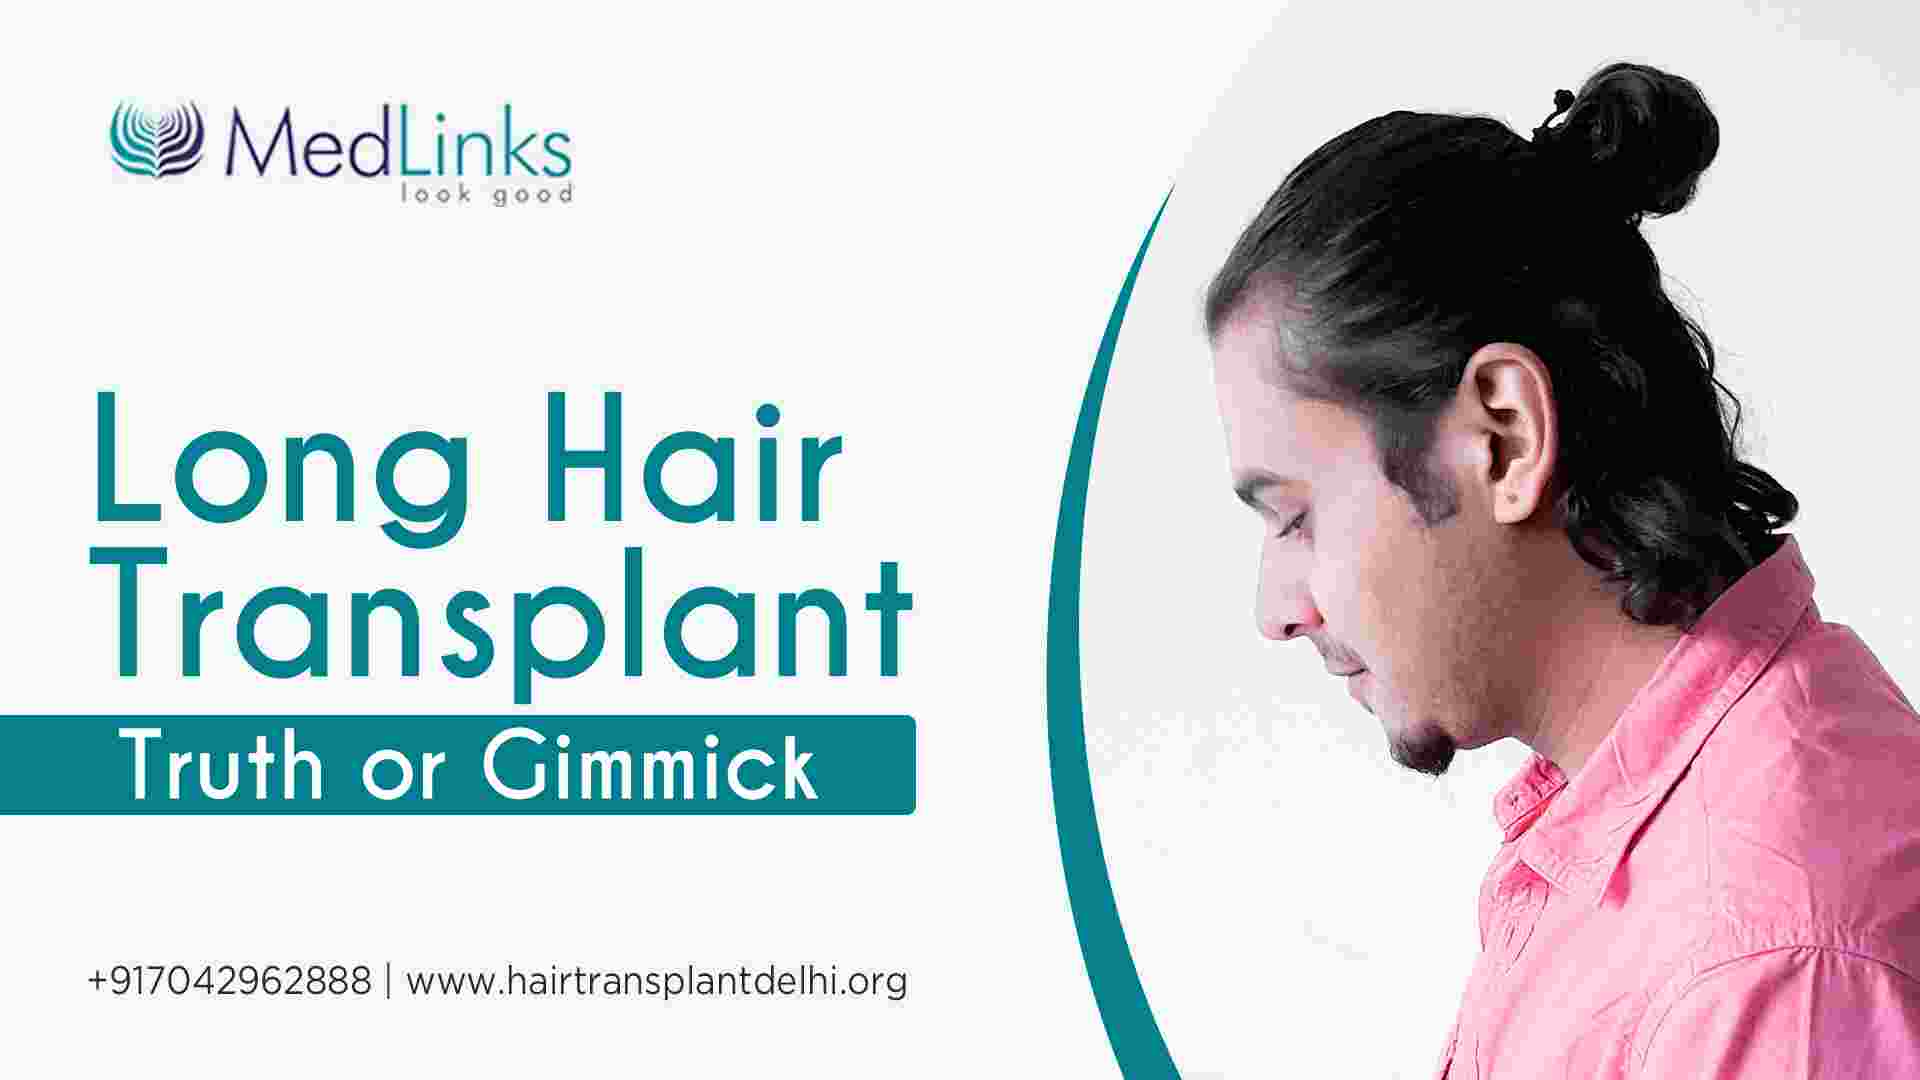 Long Hair Transplant – Truth or Gimmick